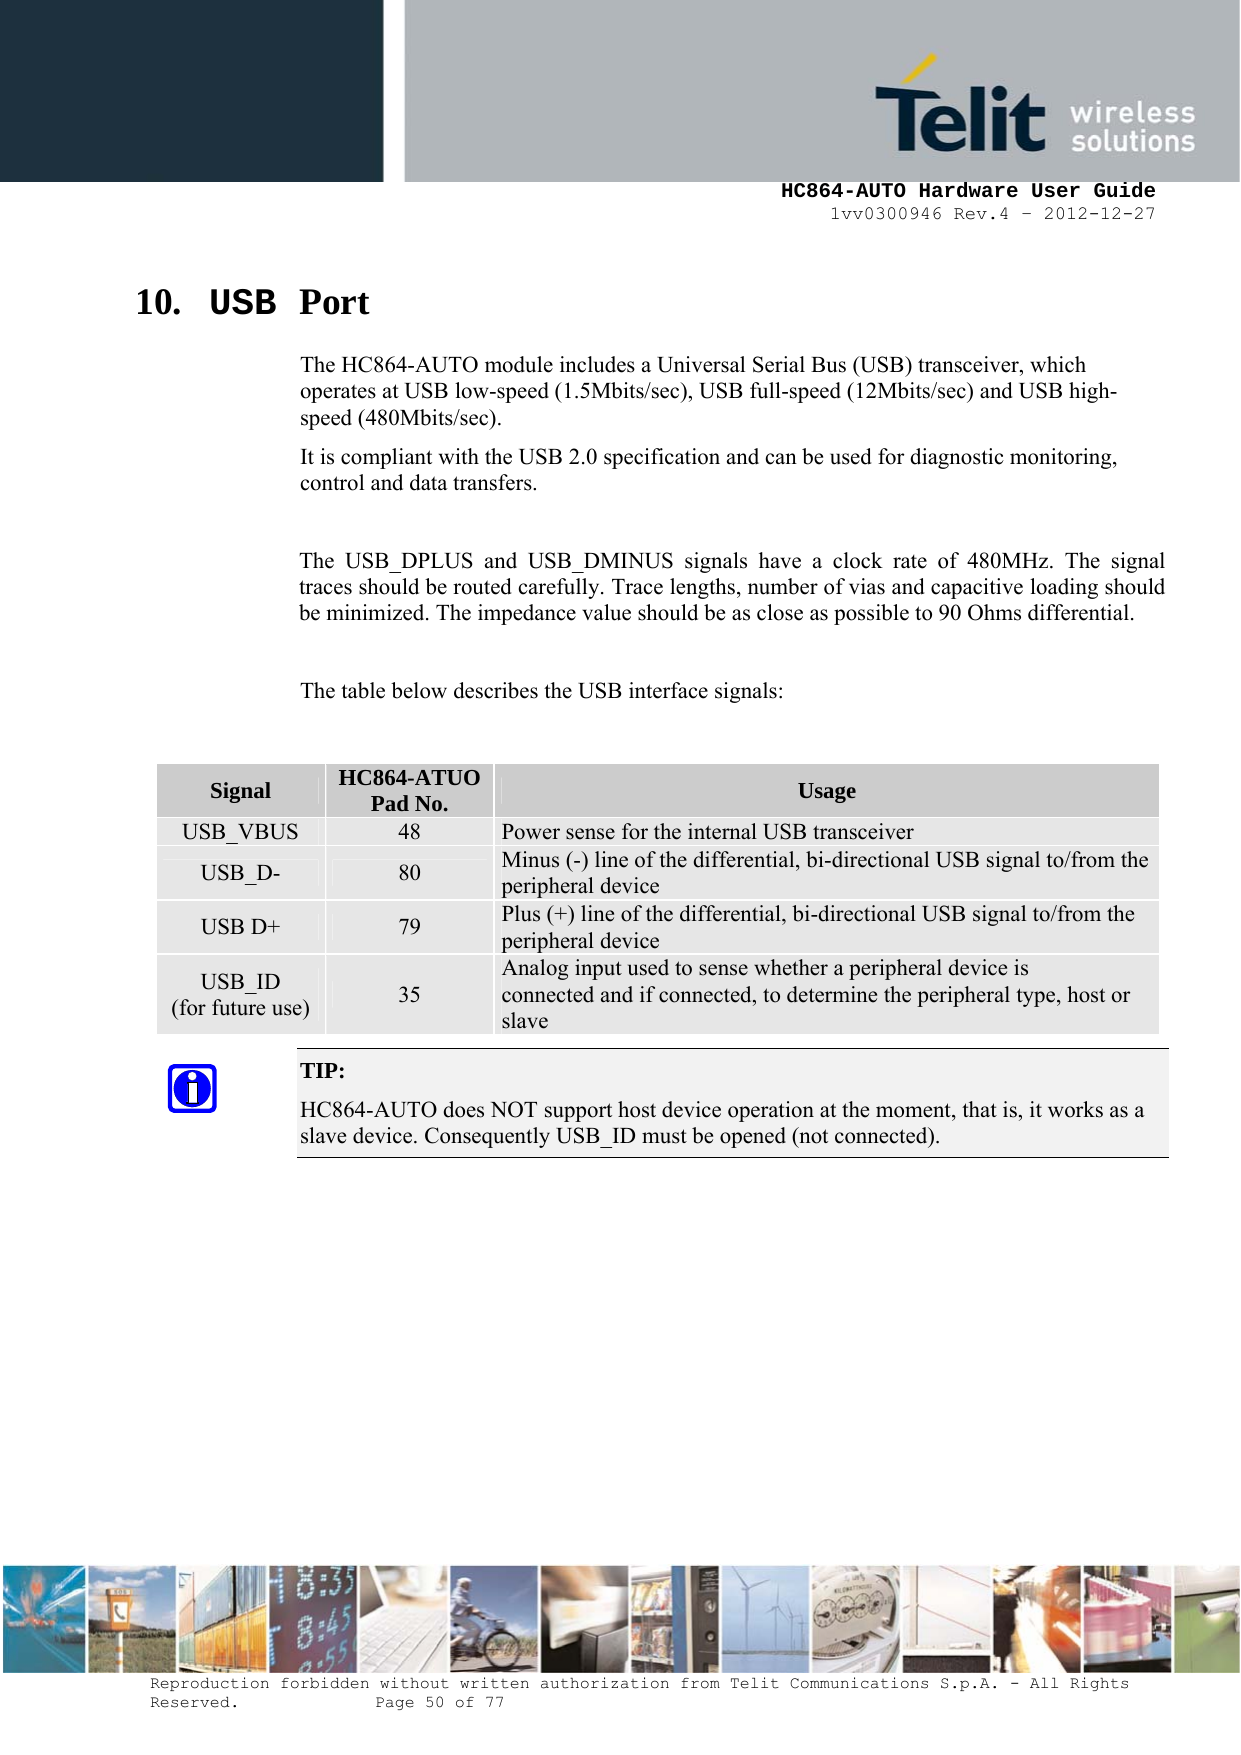     HC864-AUTO Hardware User Guide 1vv0300946 Rev.4 – 2012-12-27 Reproduction forbidden without written authorization from Telit Communications S.p.A. - All Rights Reserved.    Page 50 of 77  10. USB Port The HC864-AUTO module includes a Universal Serial Bus (USB) transceiver, which operates at USB low-speed (1.5Mbits/sec), USB full-speed (12Mbits/sec) and USB high-speed (480Mbits/sec). It is compliant with the USB 2.0 specification and can be used for diagnostic monitoring, control and data transfers.  The USB_DPLUS and USB_DMINUS signals have a clock rate of 480MHz. The signal traces should be routed carefully. Trace lengths, number of vias and capacitive loading should be minimized. The impedance value should be as close as possible to 90 Ohms differential.  The table below describes the USB interface signals:  TIP:  HC864-AUTO does NOT support host device operation at the moment, that is, it works as a slave device. Consequently USB_ID must be opened (not connected).         Signal  HC864-ATUO Pad No.  Usage USB_VBUS  48  Power sense for the internal USB transceiver USB_D-  80  Minus (-) line of the differential, bi-directional USB signal to/from the peripheral device USB D+  79  Plus (+) line of the differential, bi-directional USB signal to/from the peripheral device USB_ID (for future use)  35 Analog input used to sense whether a peripheral device is connected and if connected, to determine the peripheral type, host or slave 